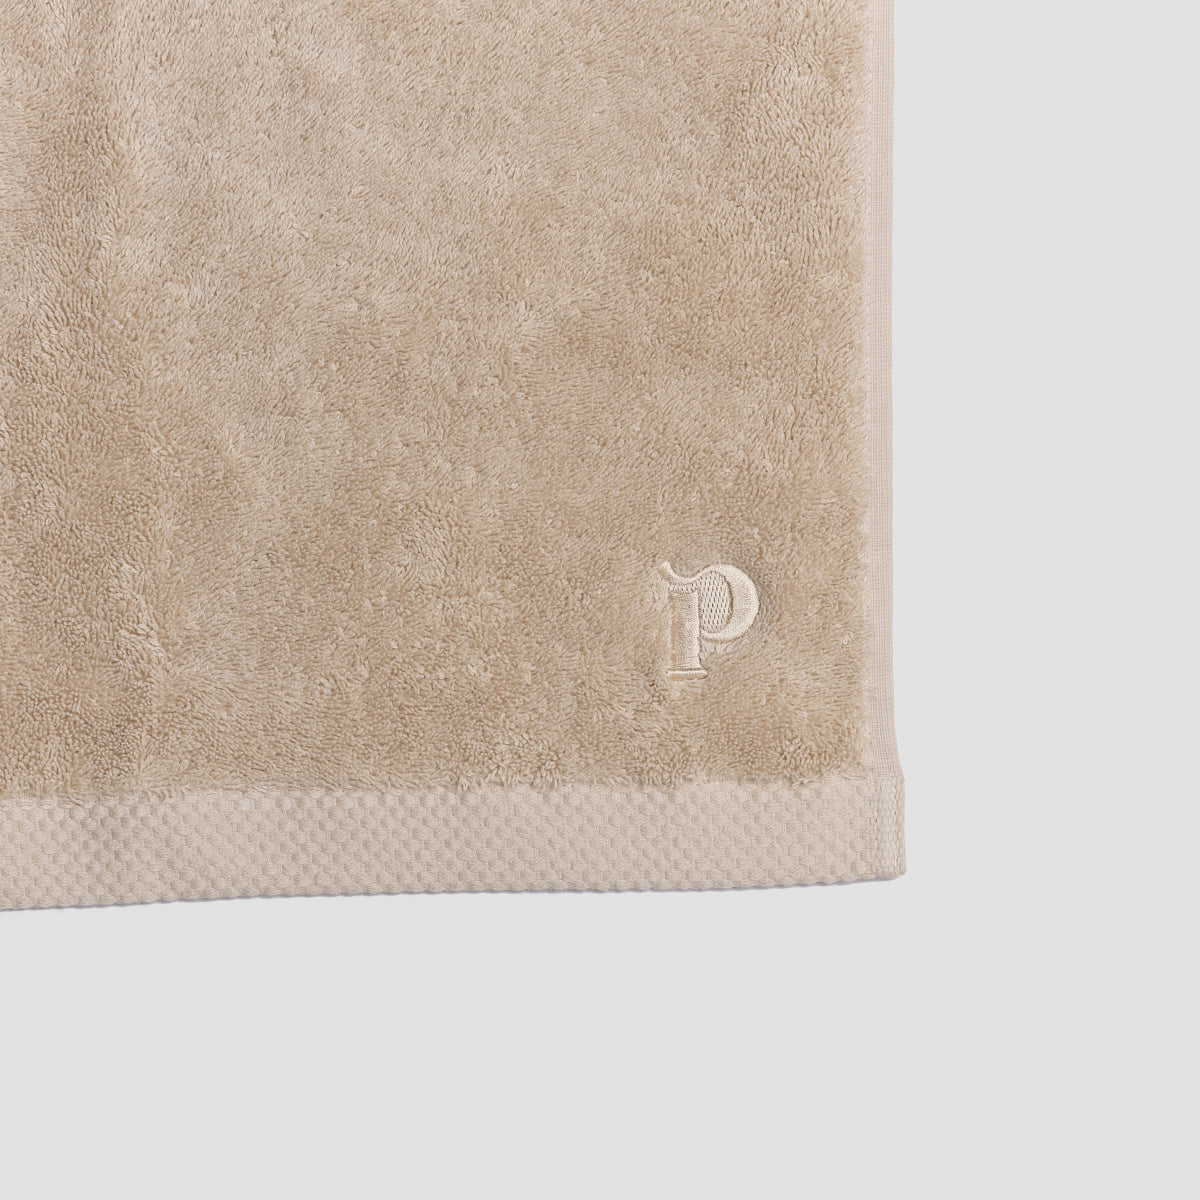 Birch Organic Cotton Face Cloth featuring embroidered logo